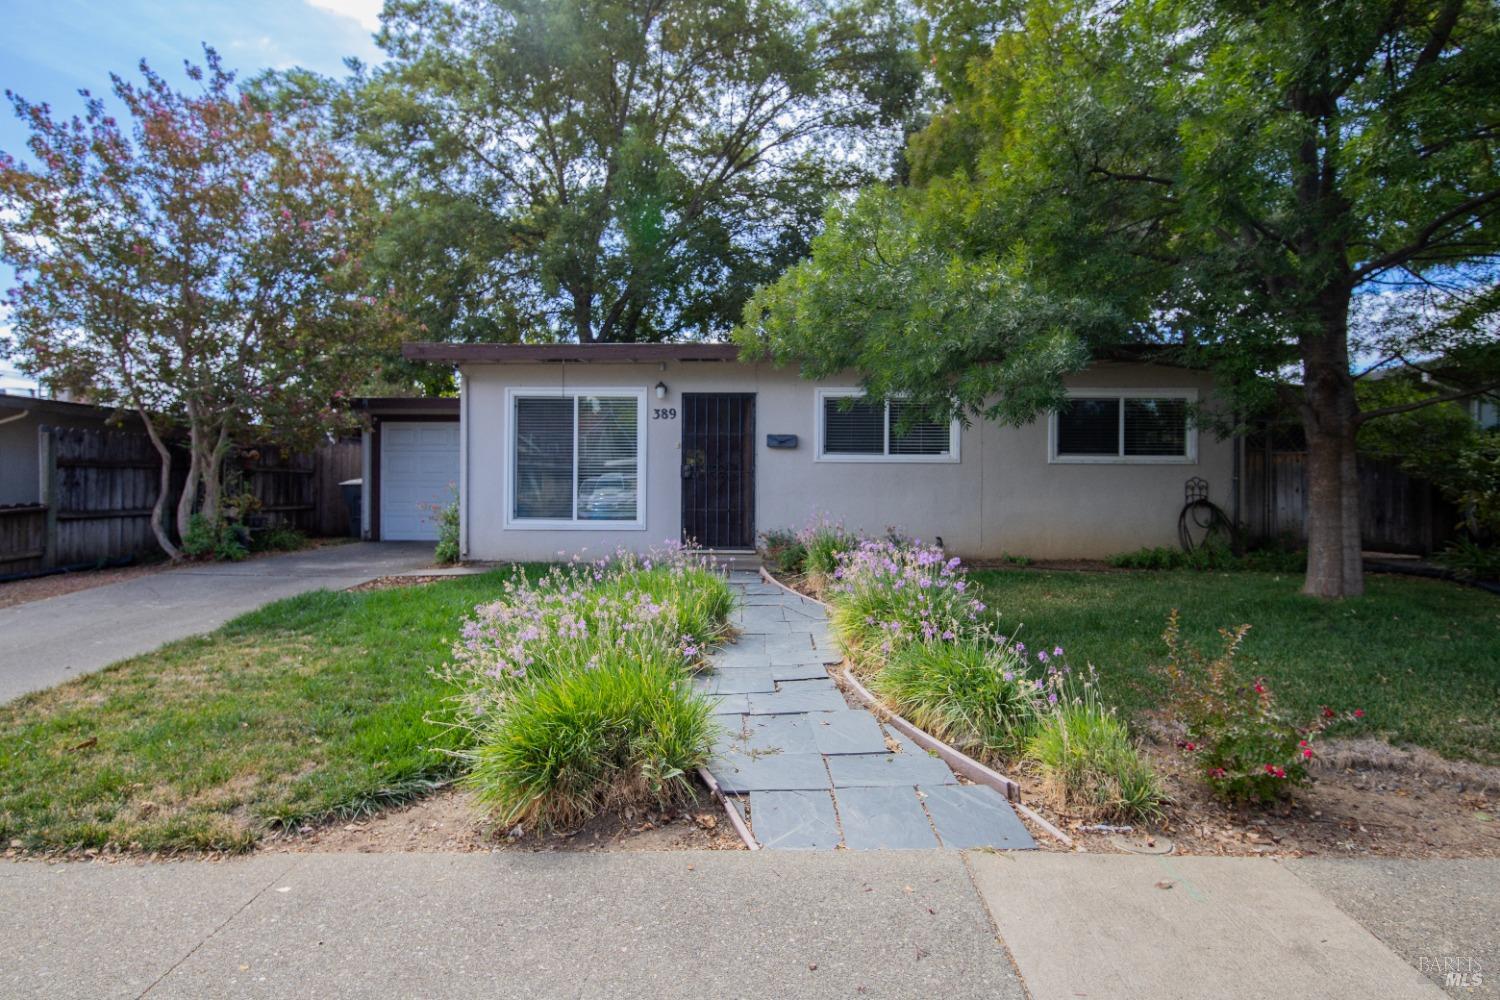 An absolute cutie in an established neighborhood! Nicely done enclosed patio room and laundry rm (no